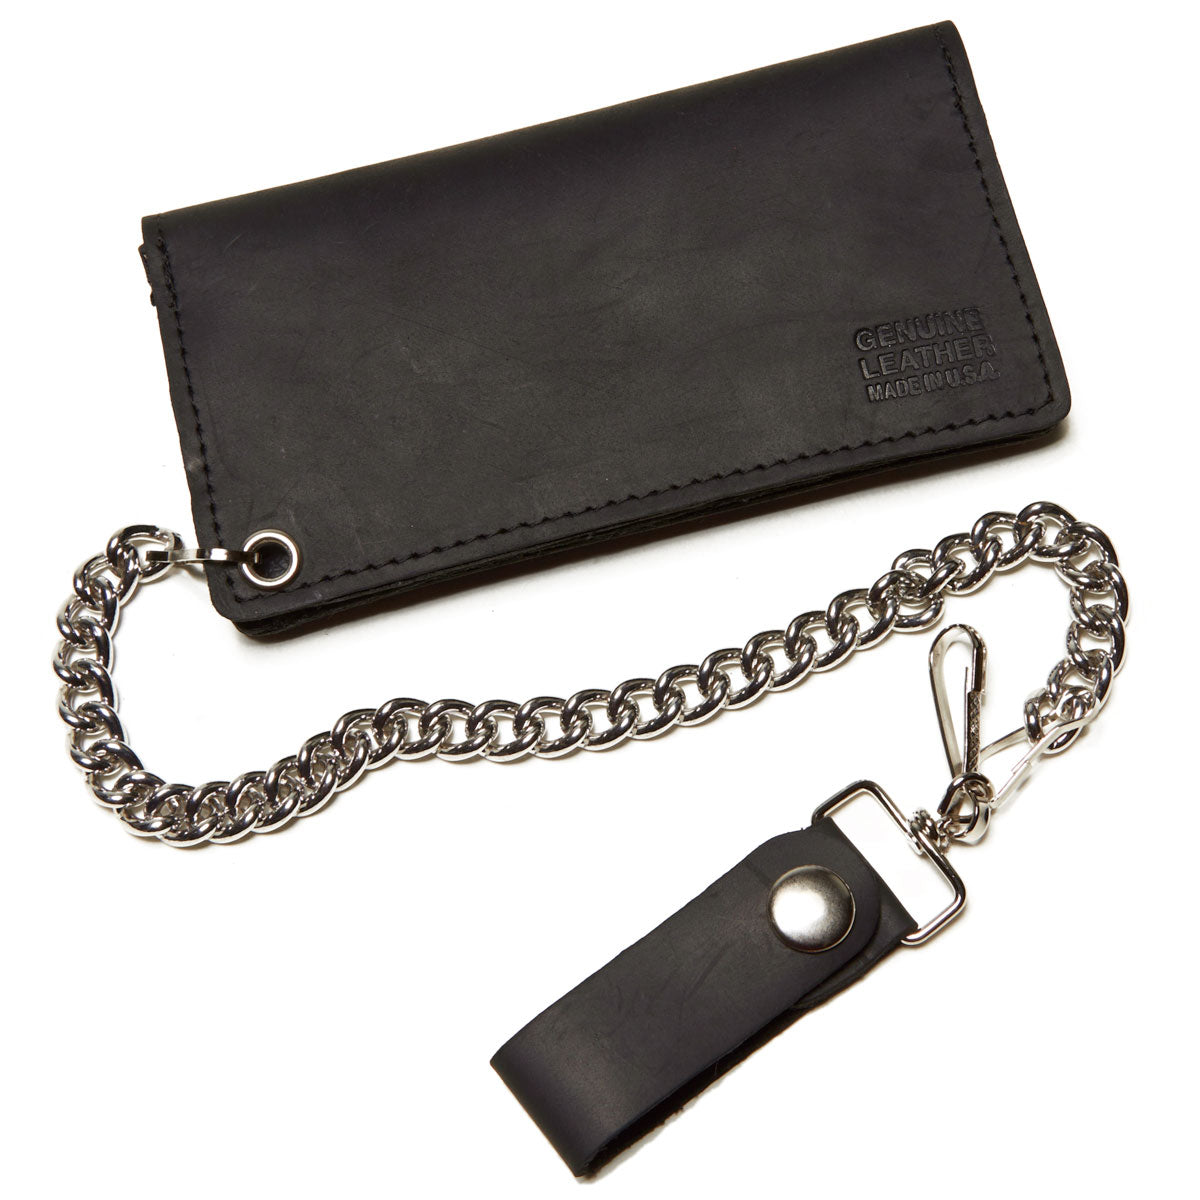 Dogtown Suicidal Large Leather Chain Wallet - Black image 3